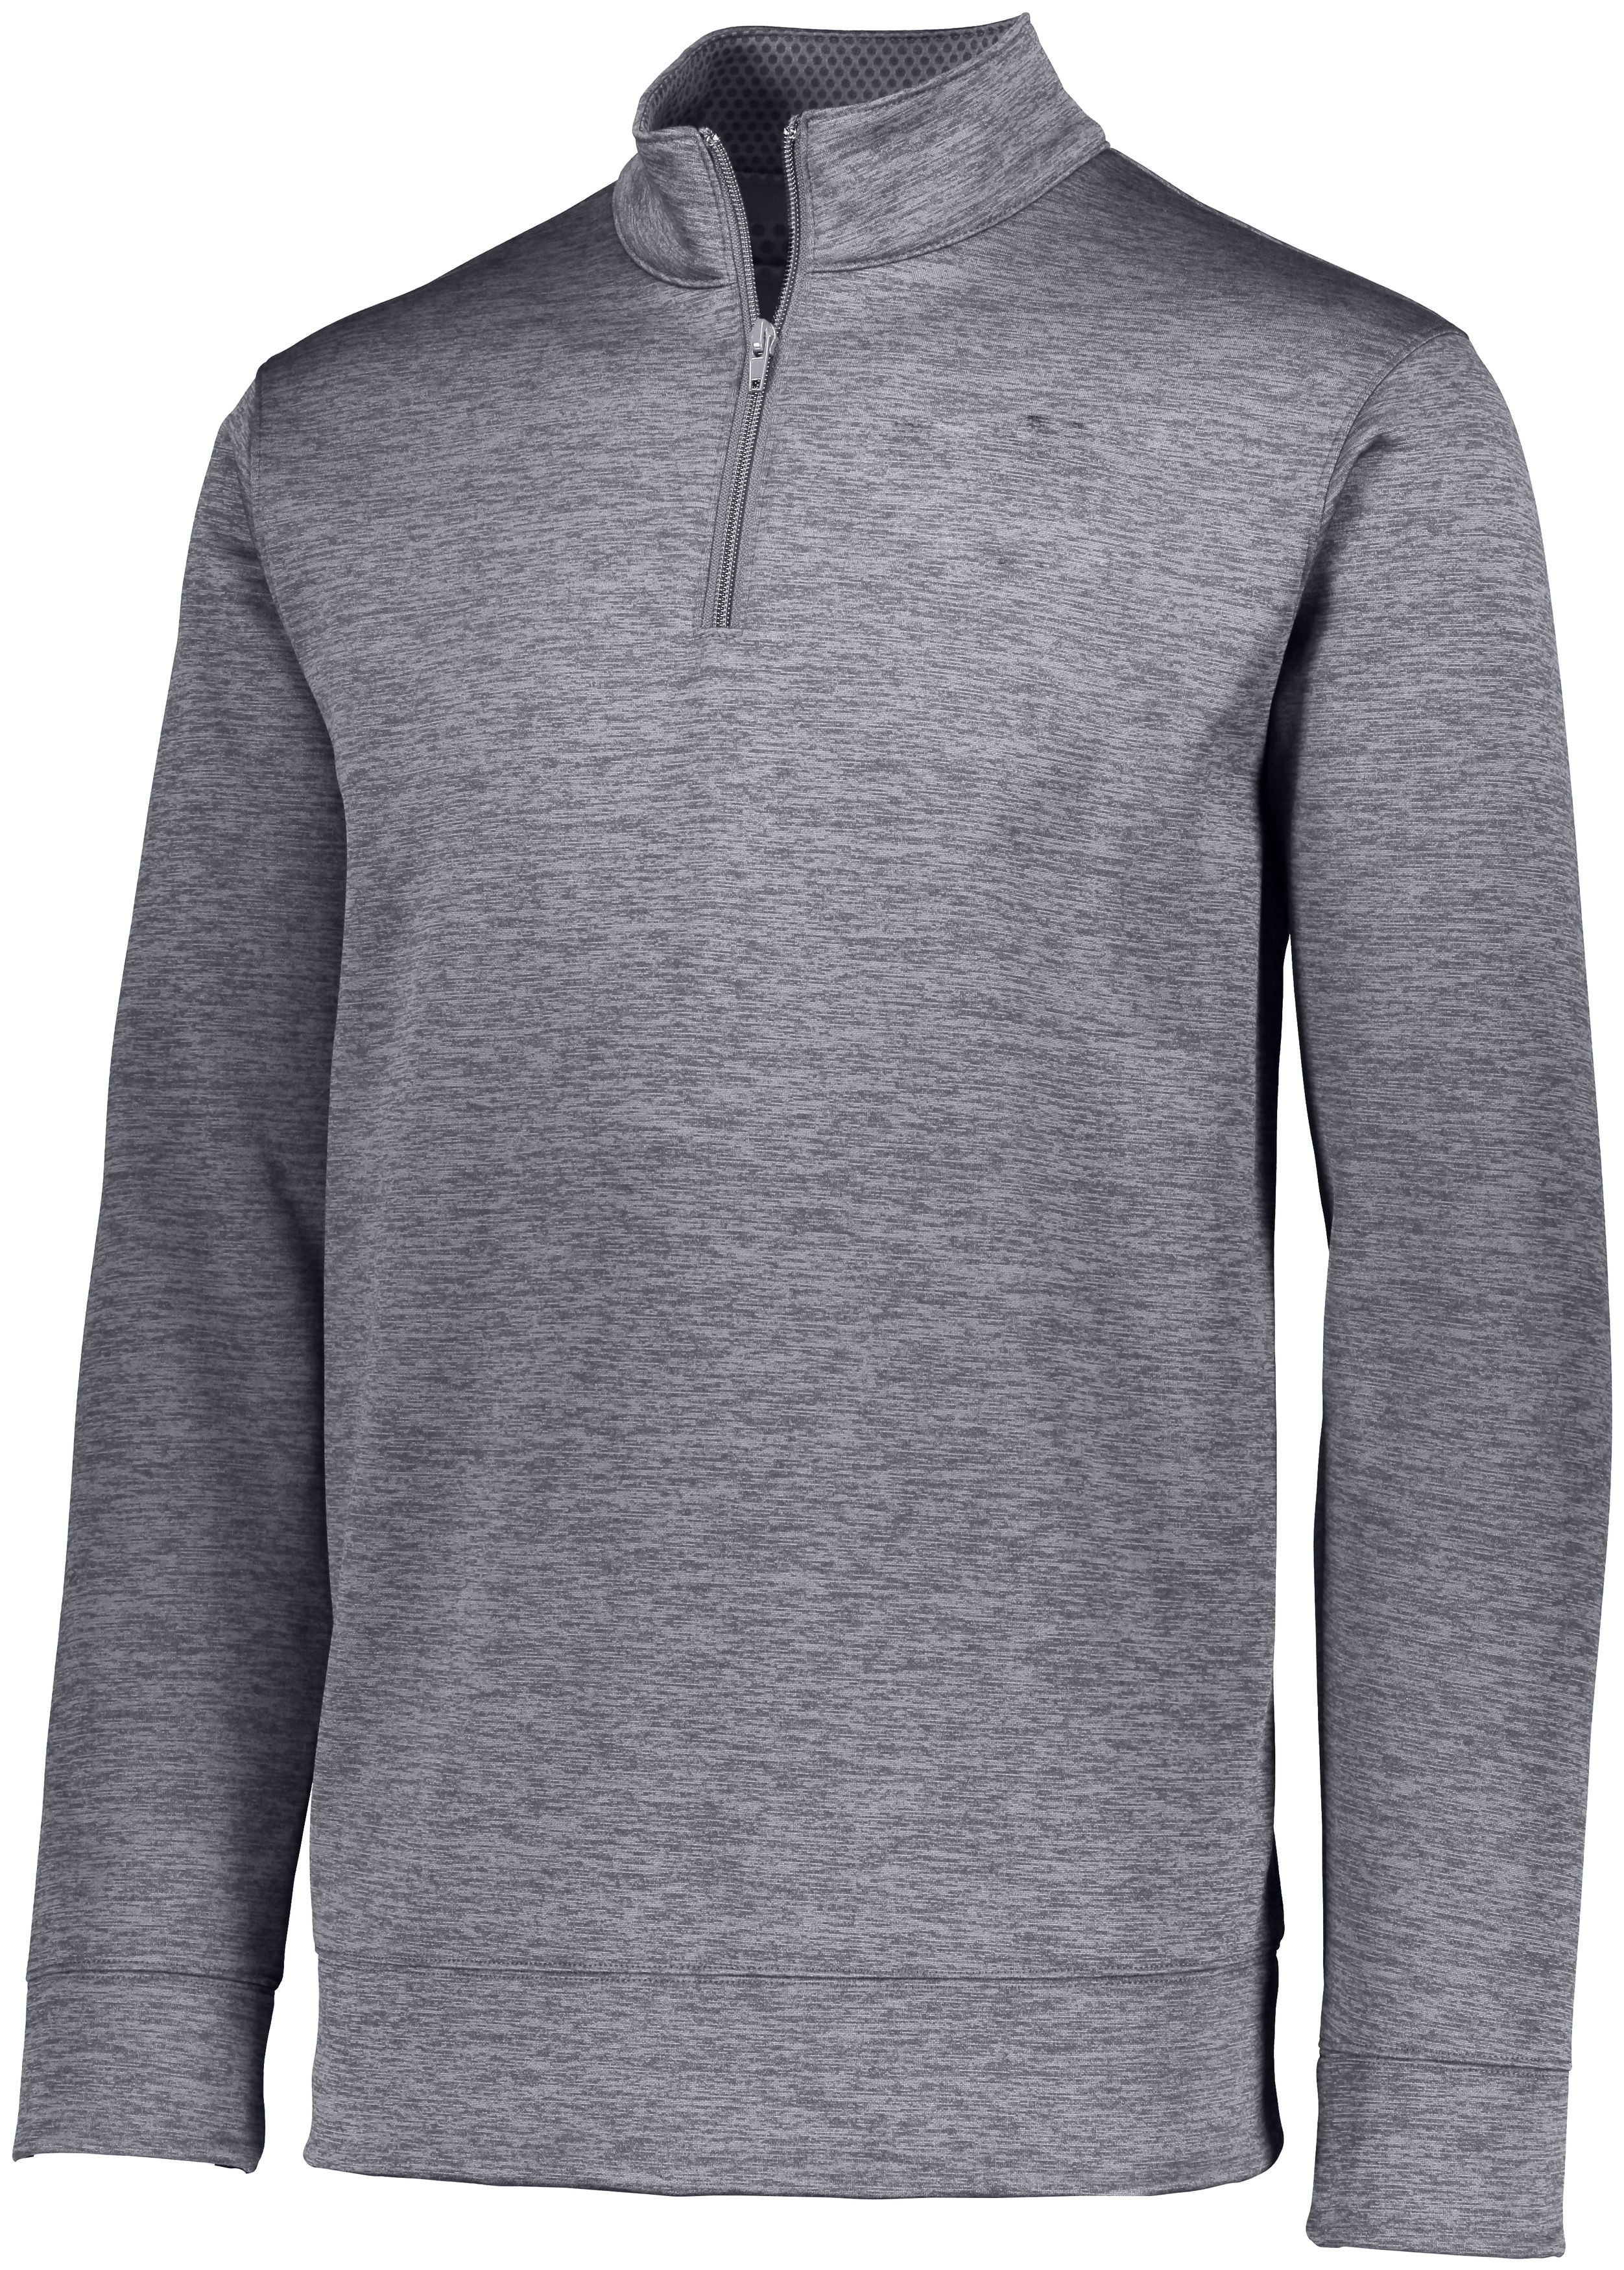 Augusta Sportswear Stoked Tonal Heather Pullover in Graphite  -Part of the Adult, Adult-Pullover, Augusta-Products, Outerwear, Tonal-Fleece-Collection product lines at KanaleyCreations.com